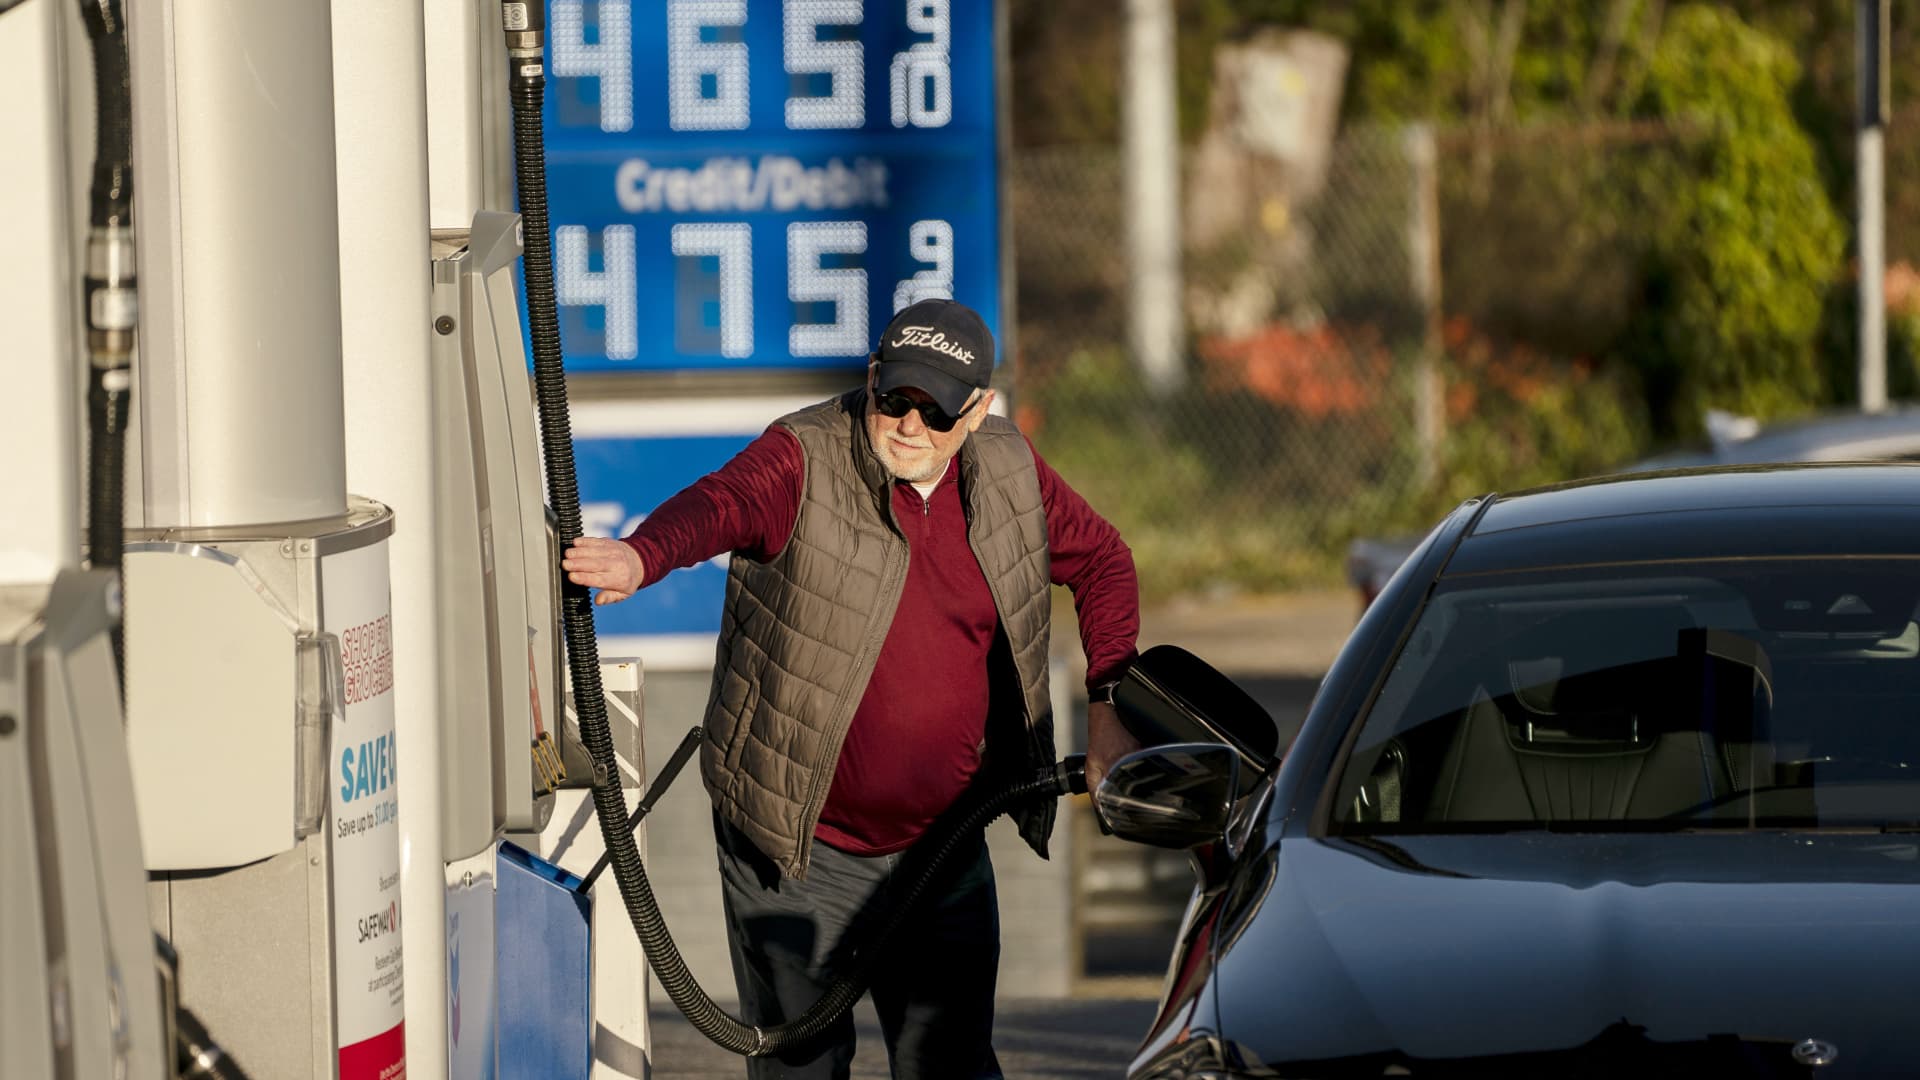 A customer refuels at a Chevron gas station with prices above $4 a gallon in Seattle, Washington, U.S., on Monday, March 7, 2022.